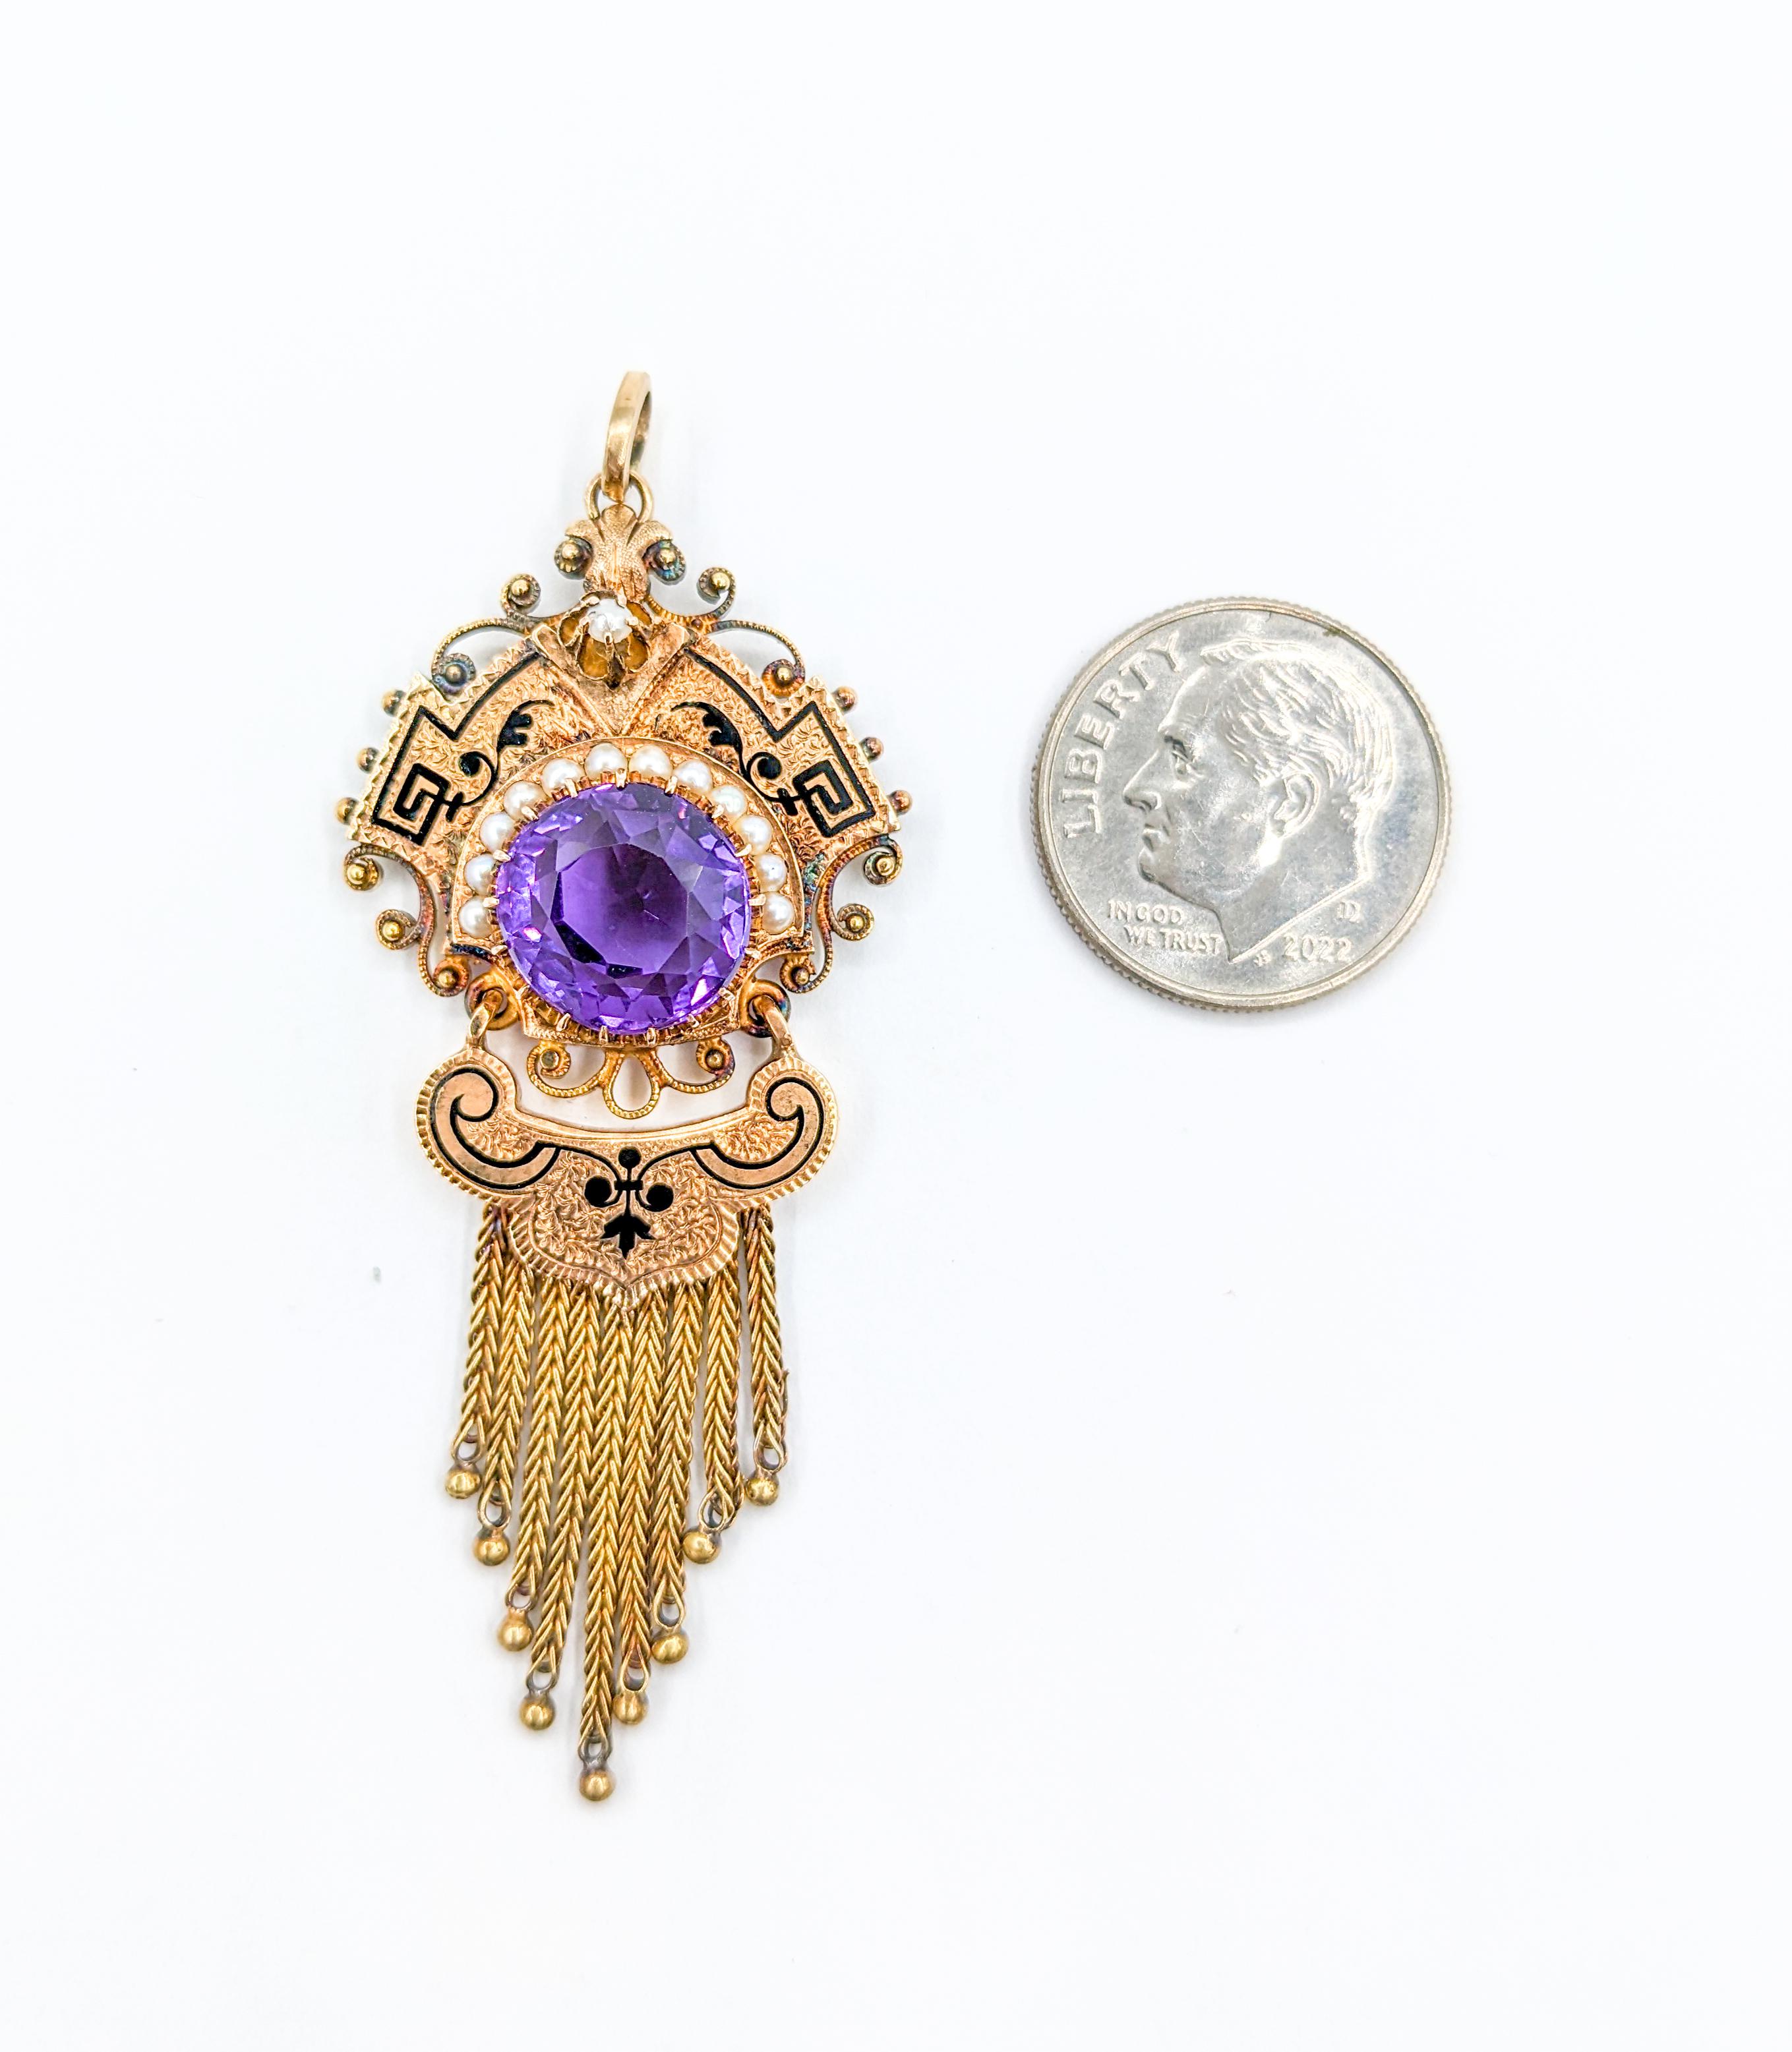 Victorian Amethyst Gold Taille d'Épargne Fringe Pendant with Seed Pearls For Sale 2